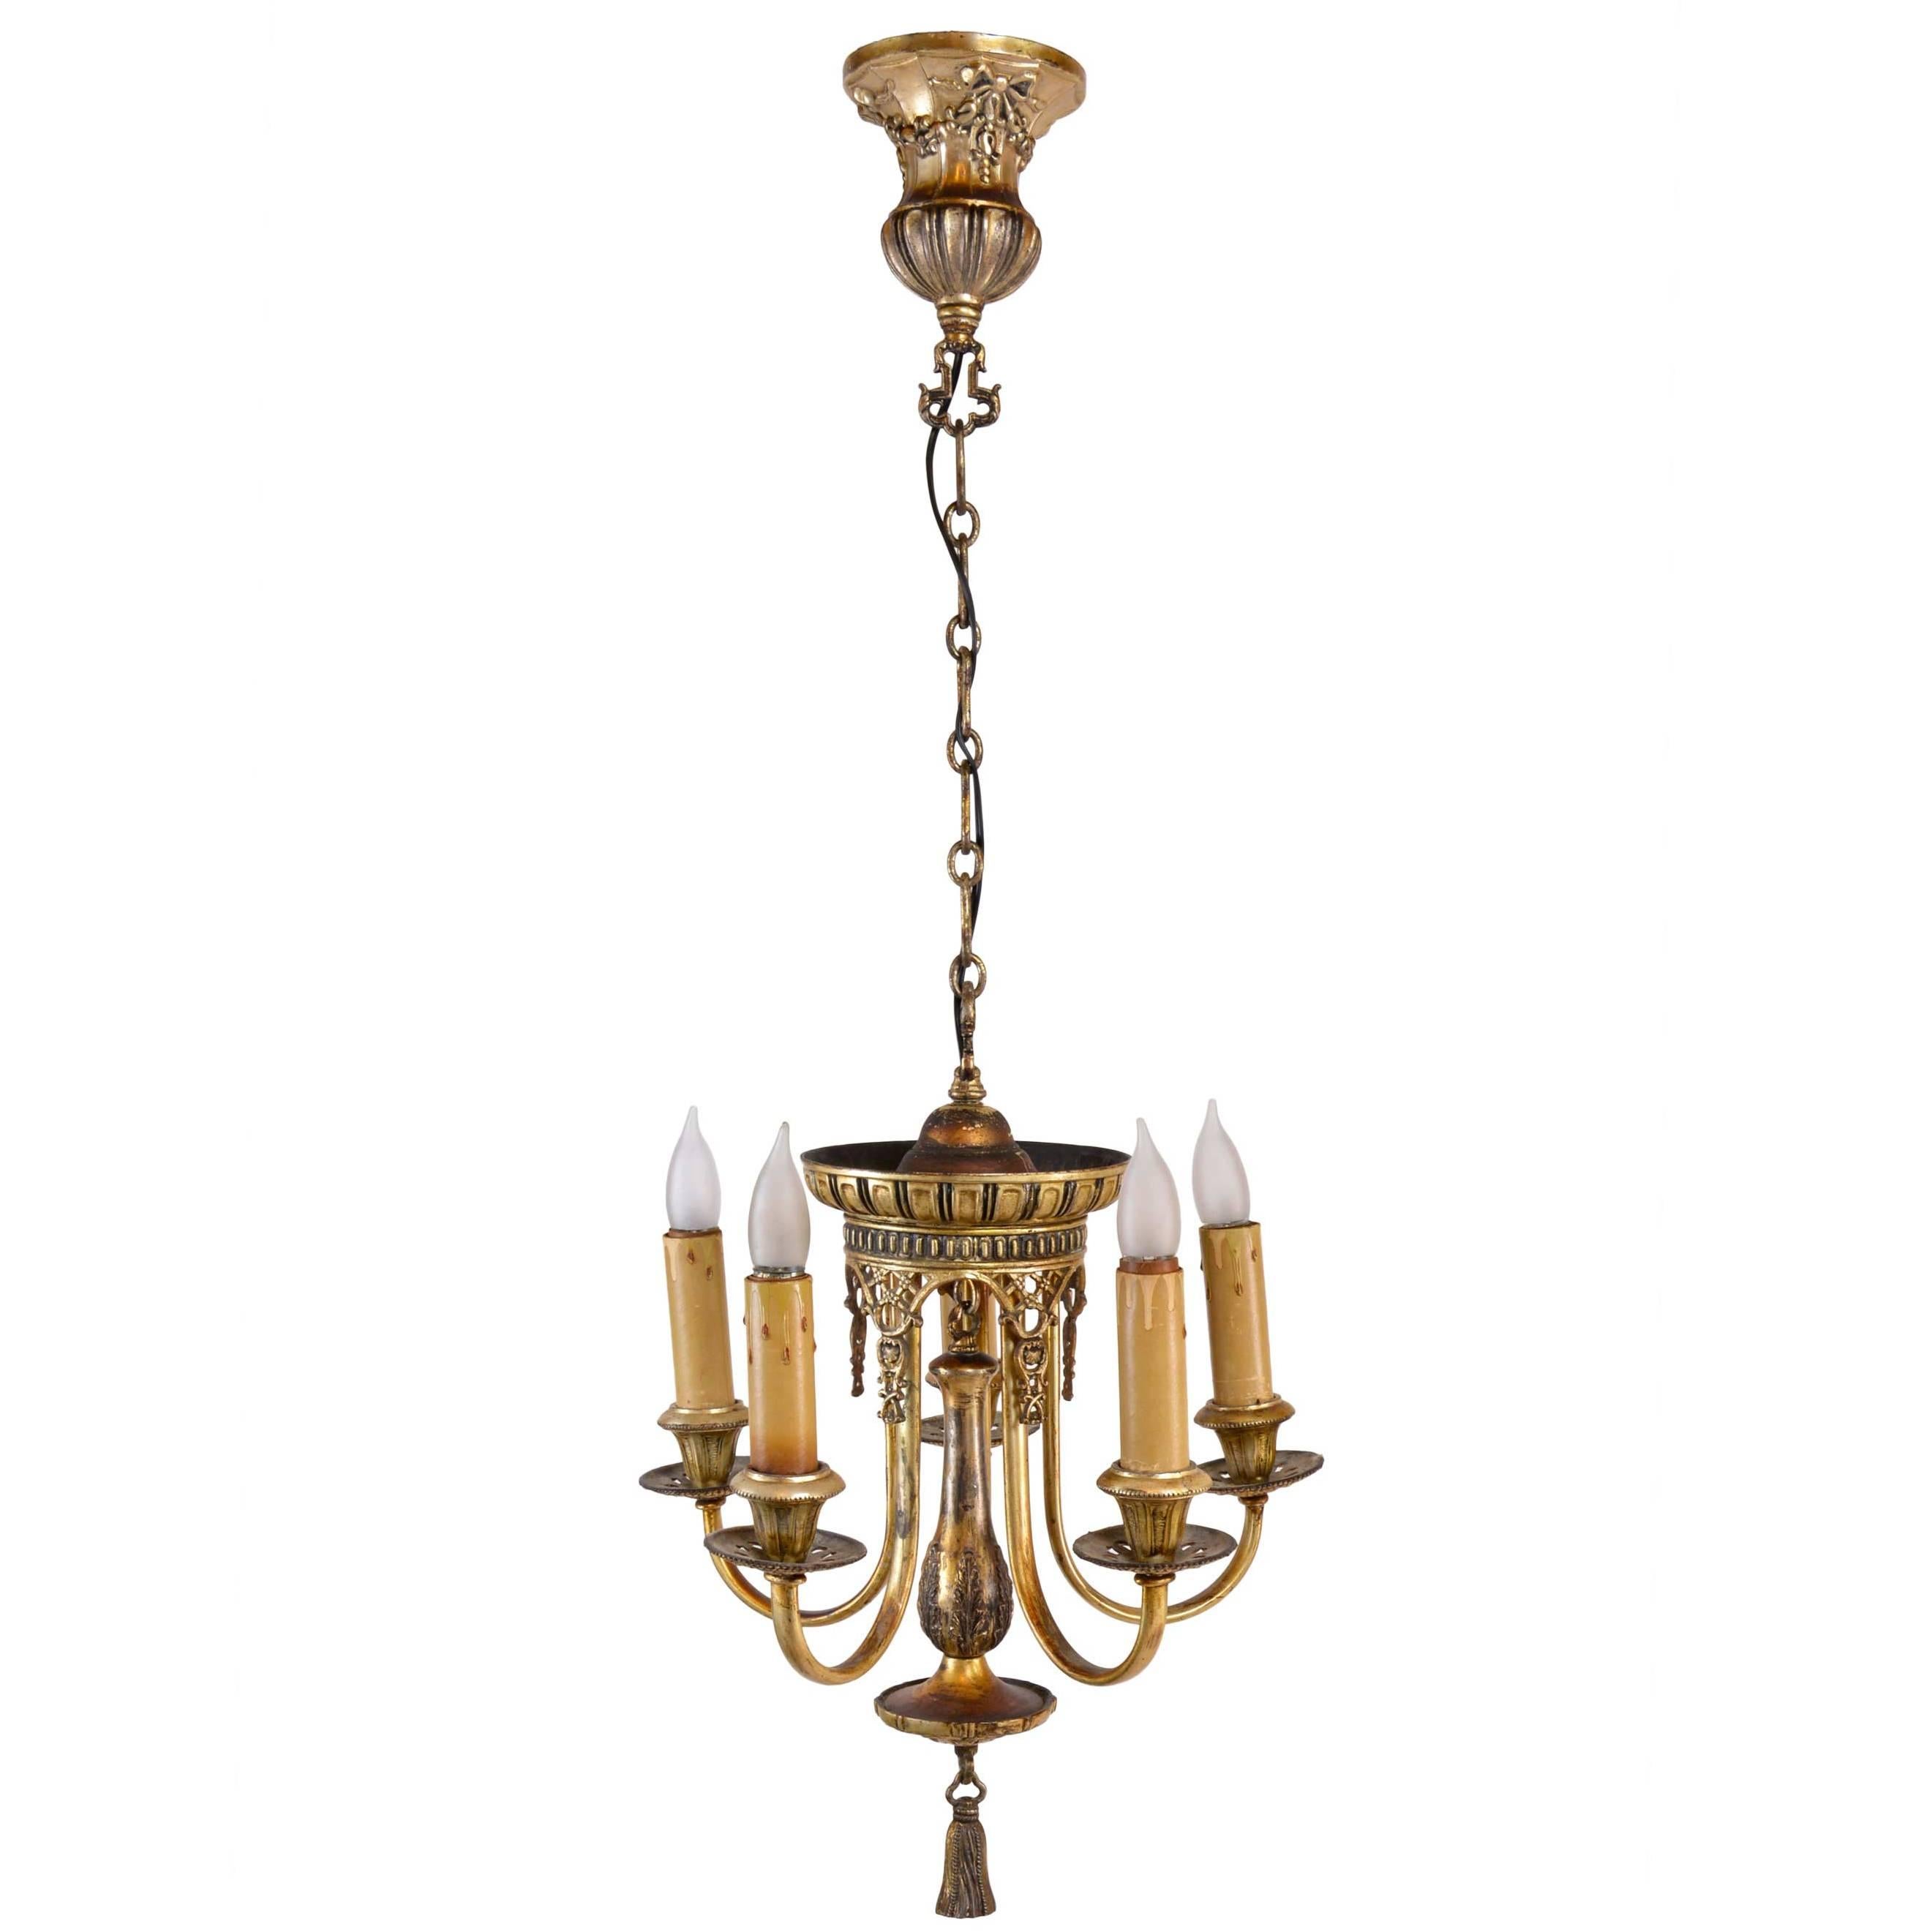 Ornate 1920s Silver Plated Chandelier